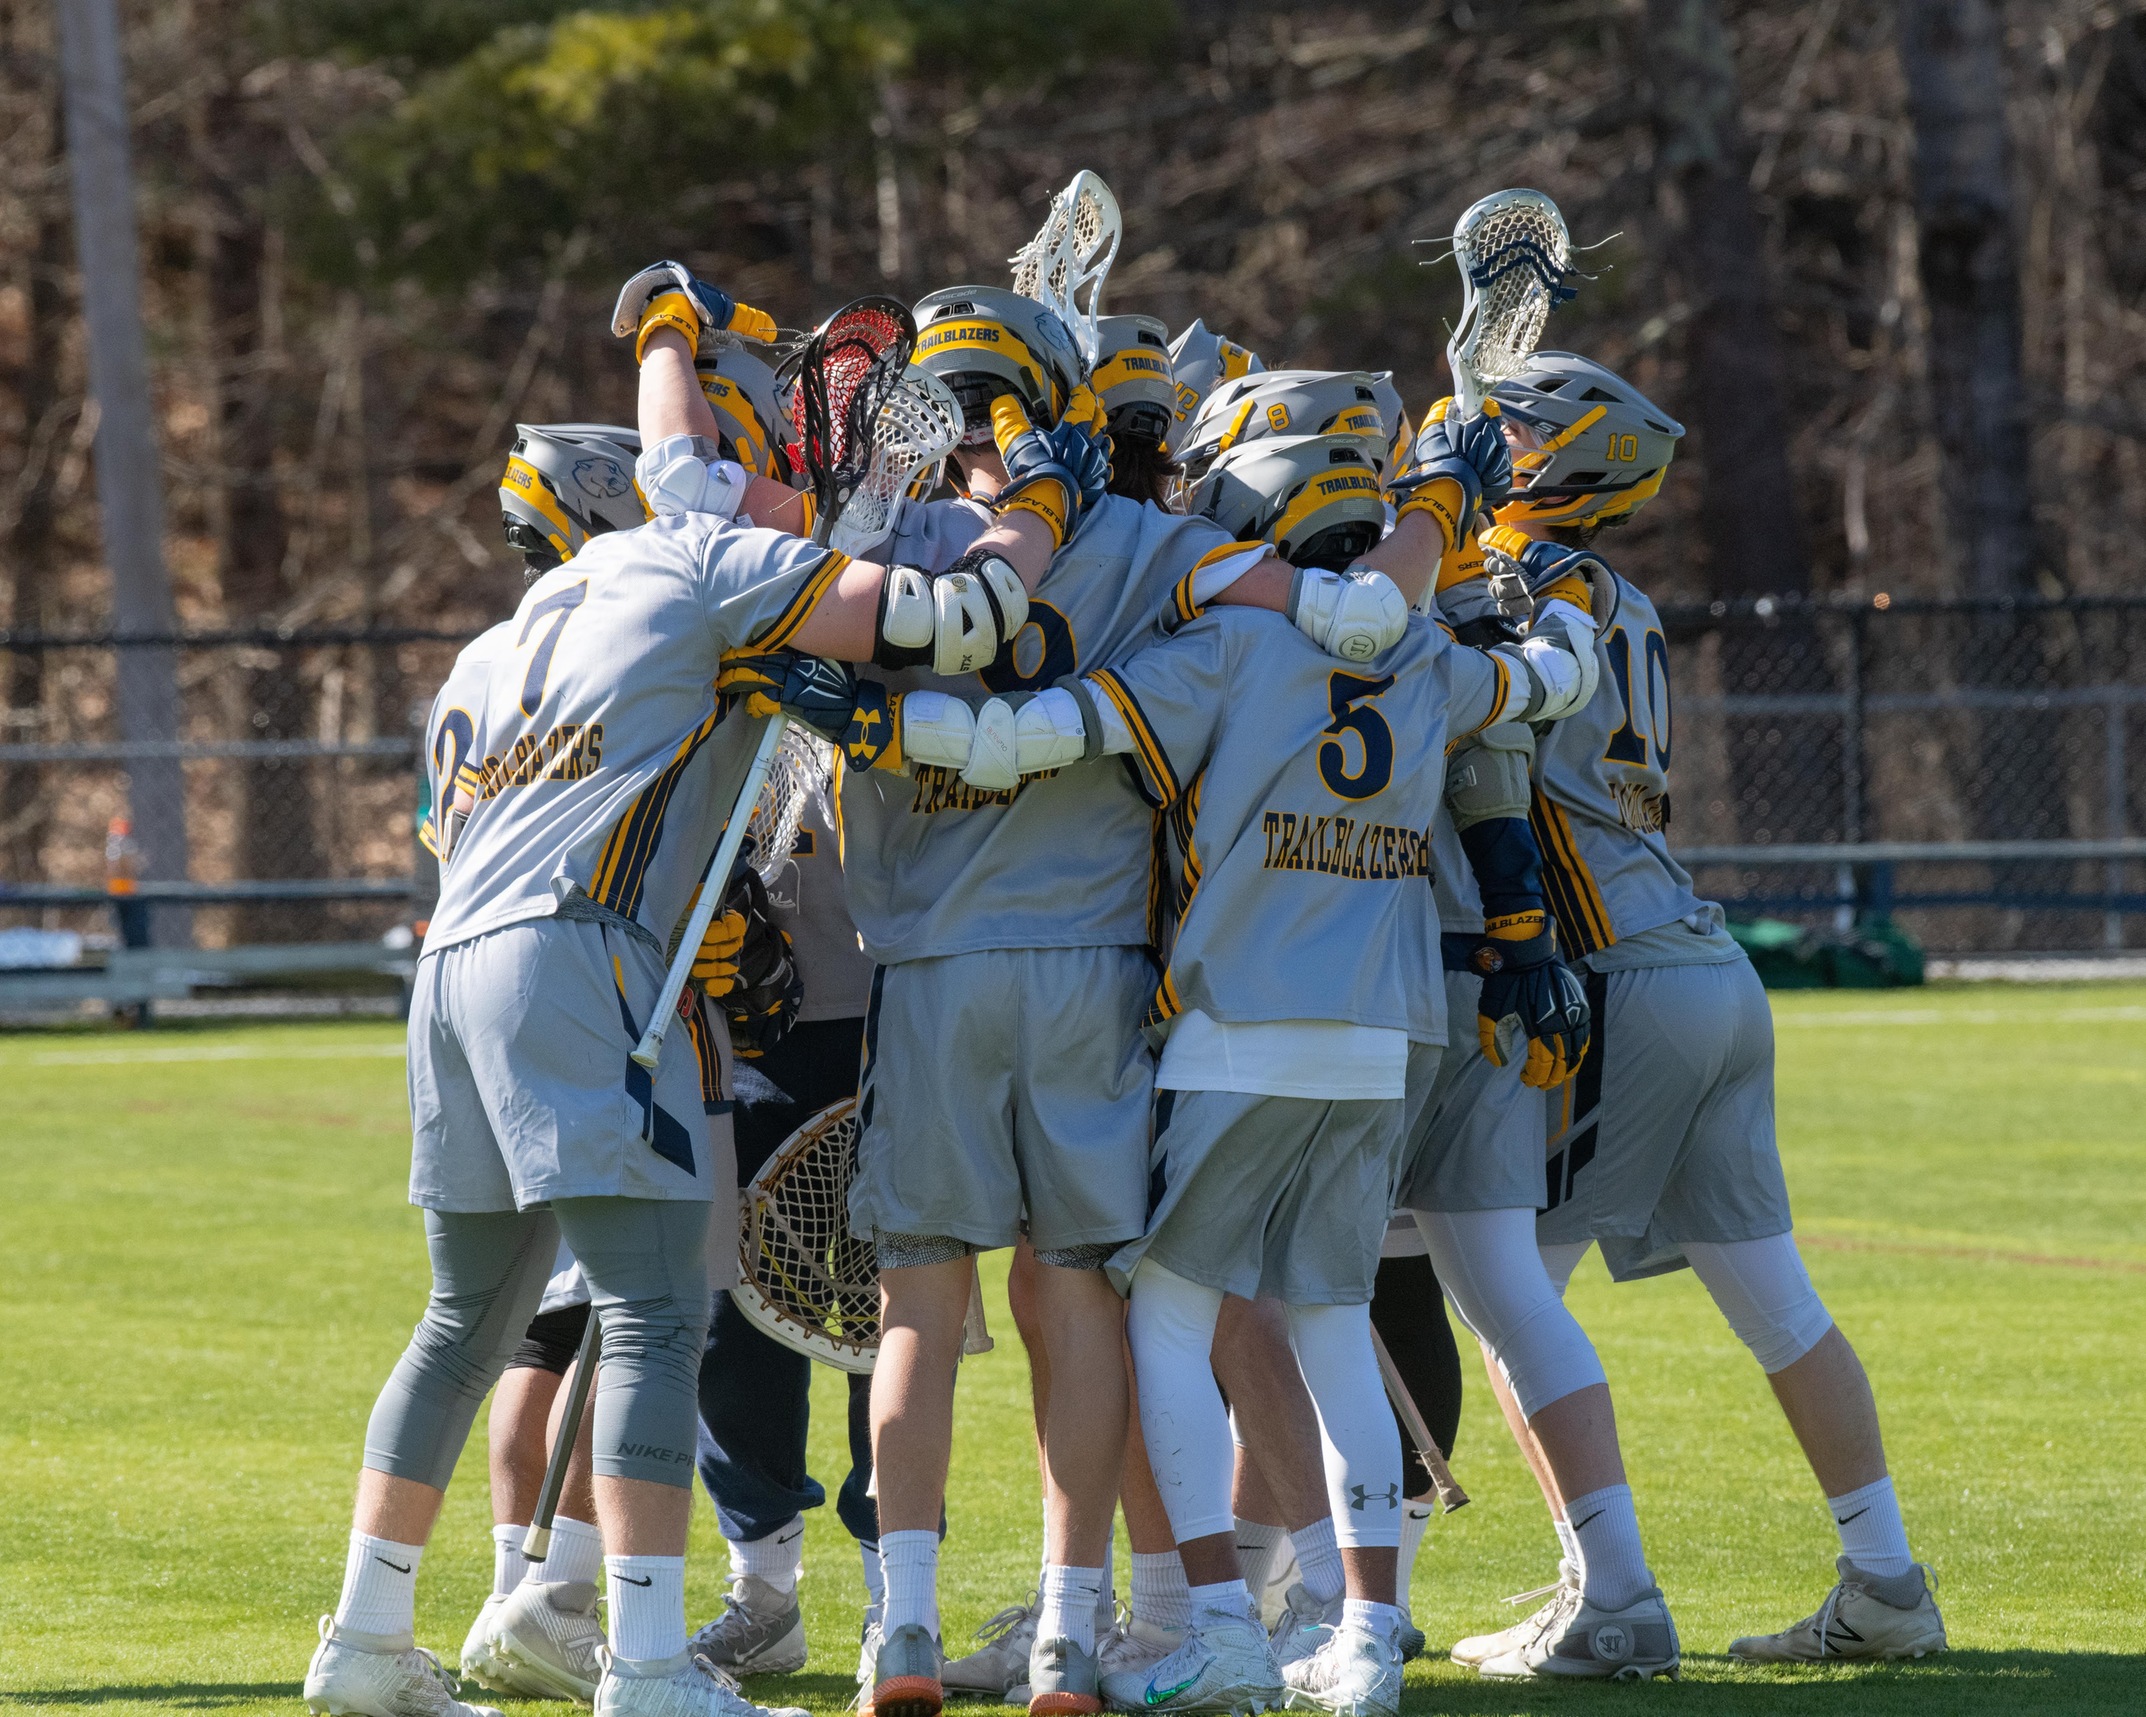 The MCLA Men's Lacrosse team celebrates their first win in program history after defeating Lyndon today 6-3